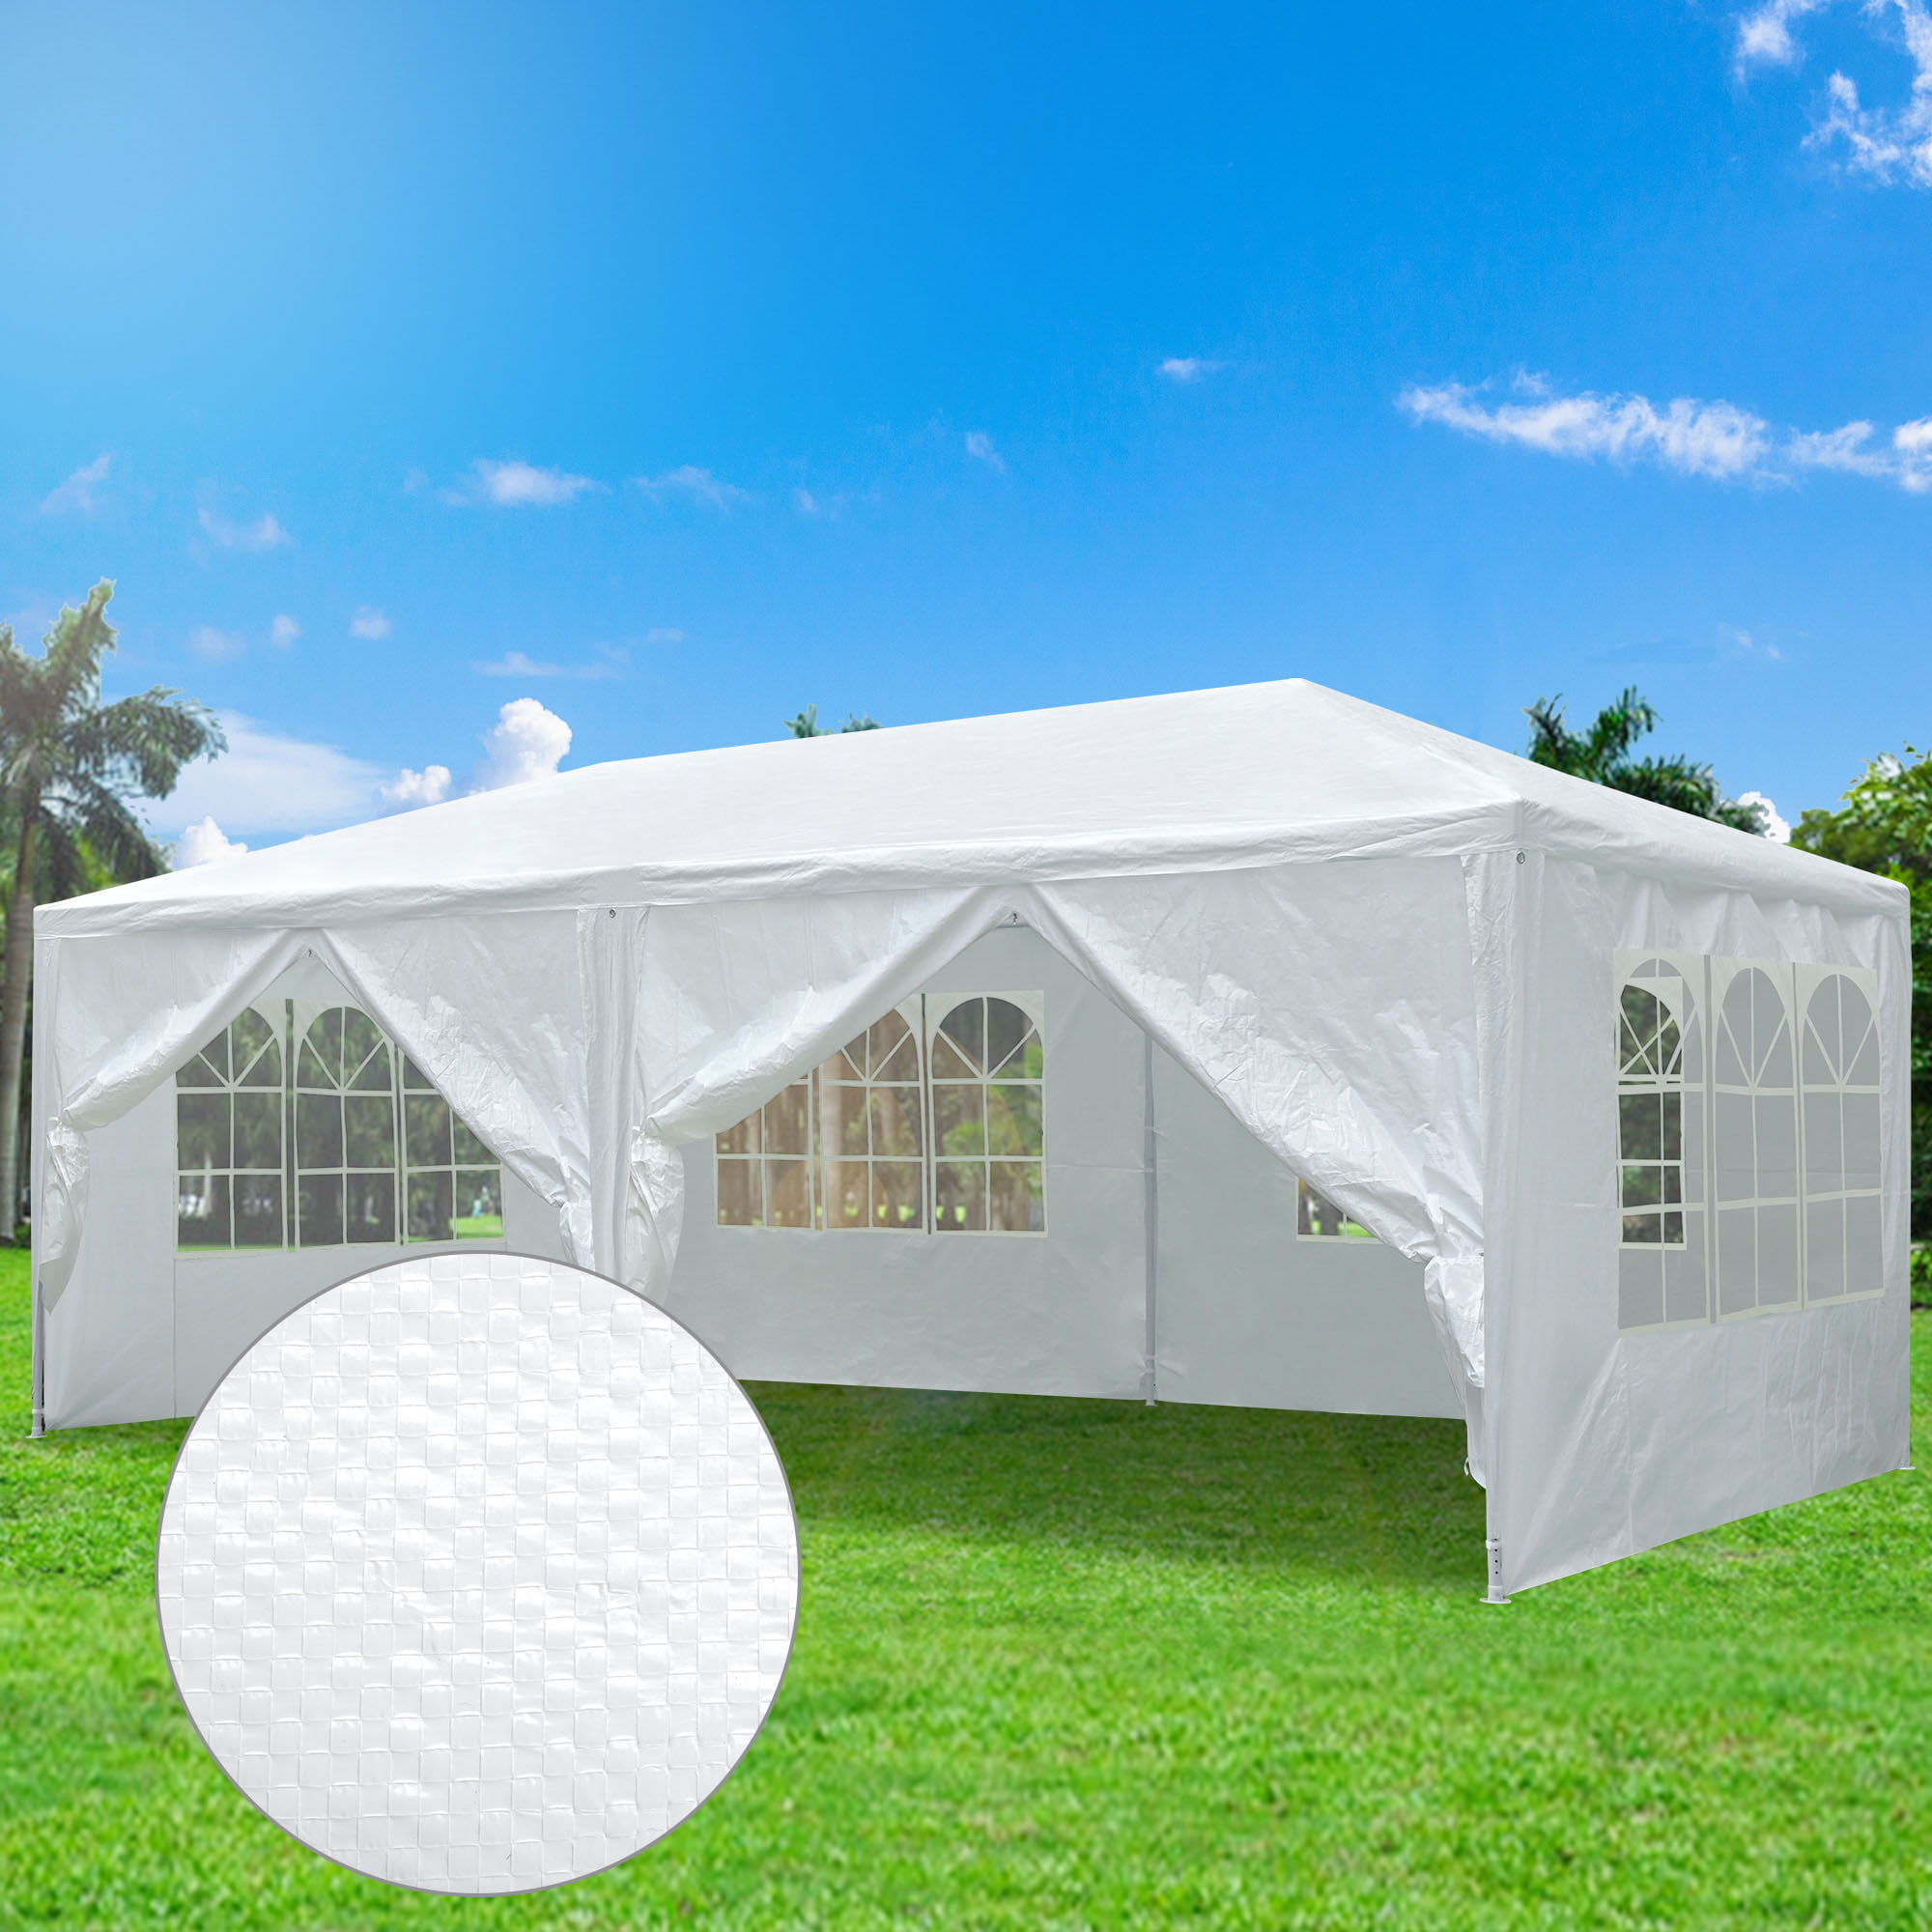 Wholesale Christmas Or Big Madison Square Garden Events: Yellow Inflatable  Tent Building With 1 Door Perfect For Parties From Aceairart123, $1,035.91